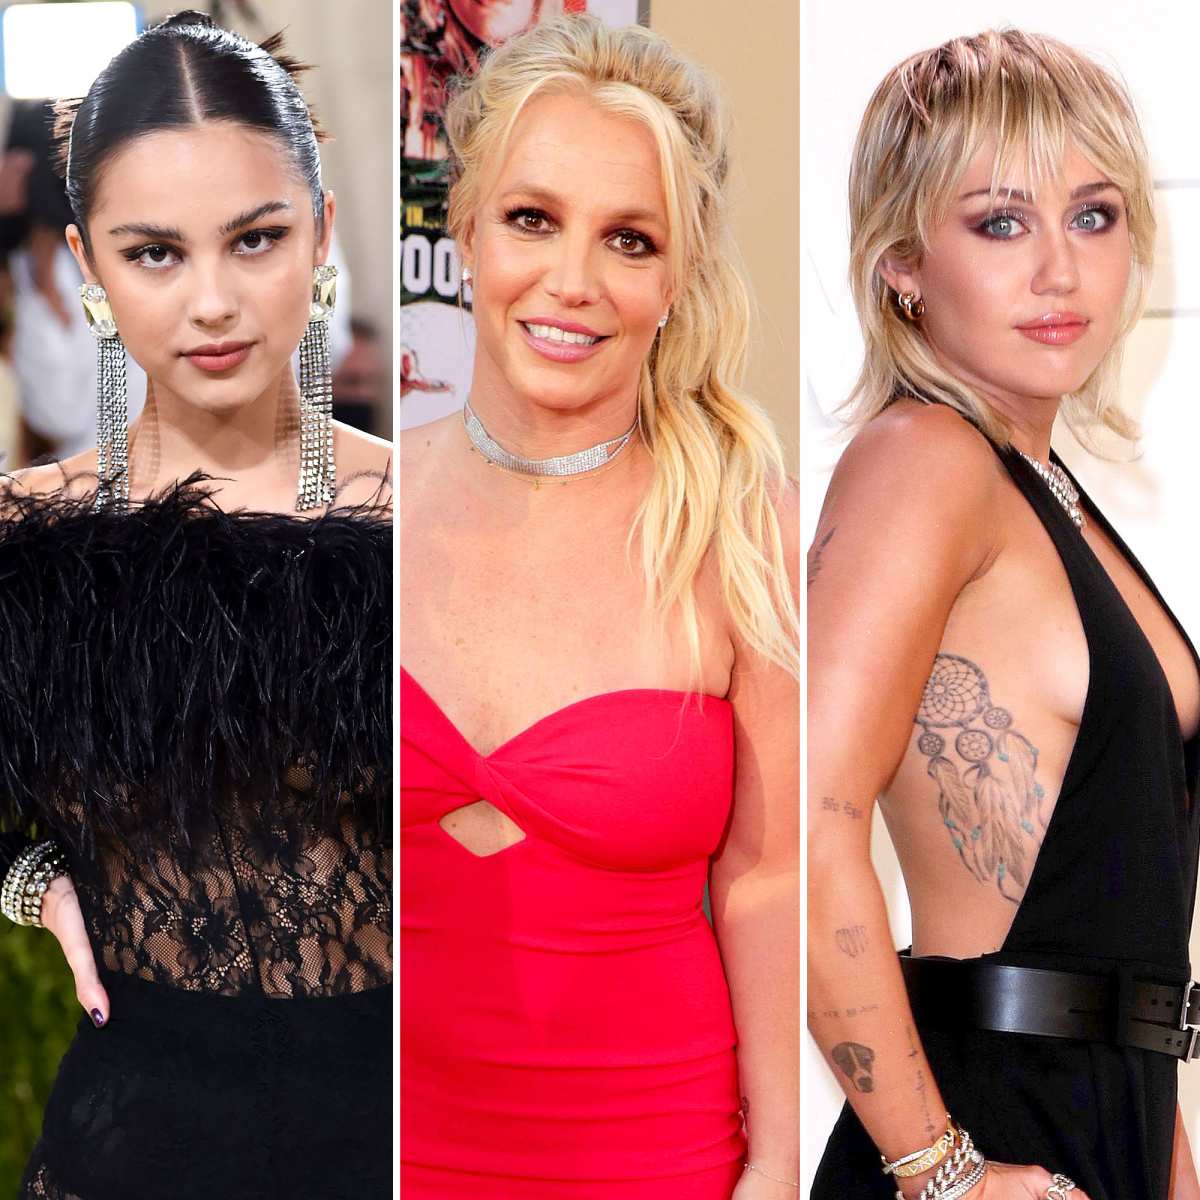 Free Britney Spears Sex Tapes - Paris Hilton, Miley Cyrus, More Celebs Support #FreeBritney Movement